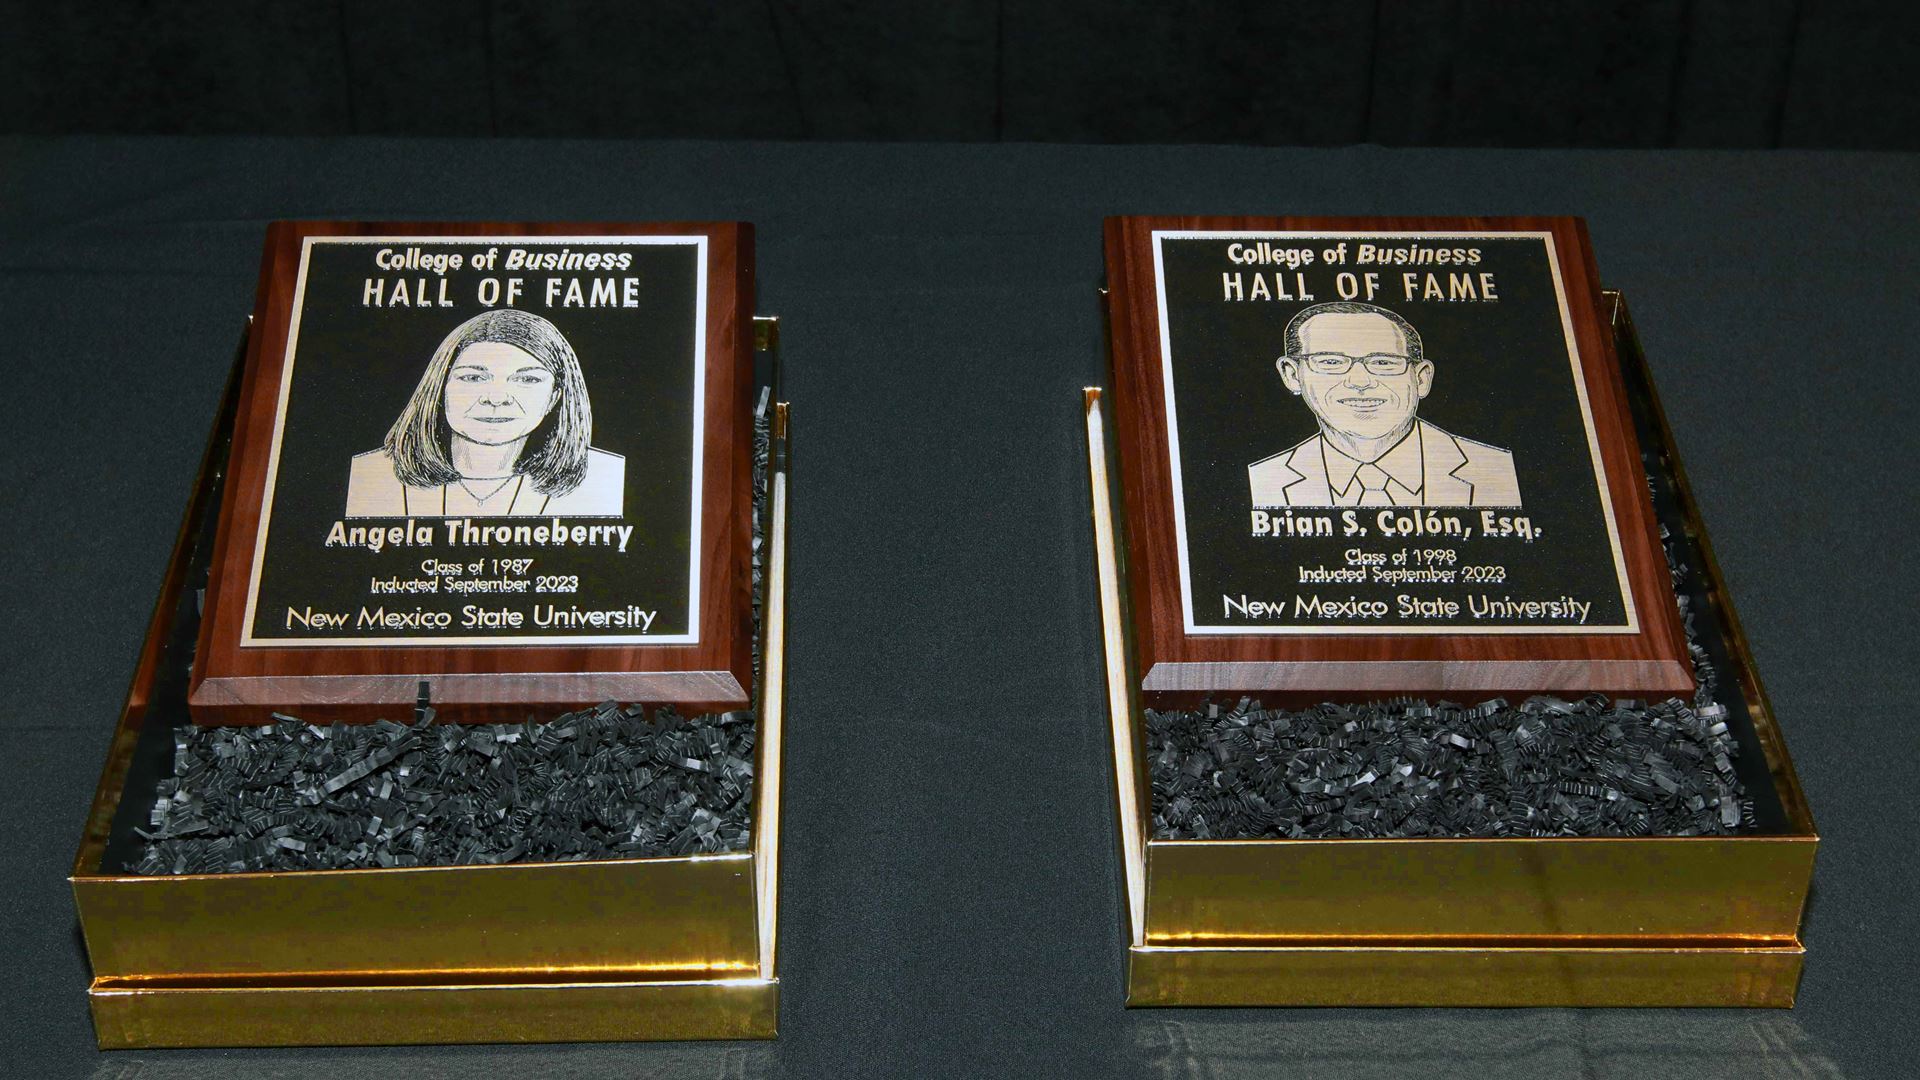 College of Business 2023 Hall of Fame plaques